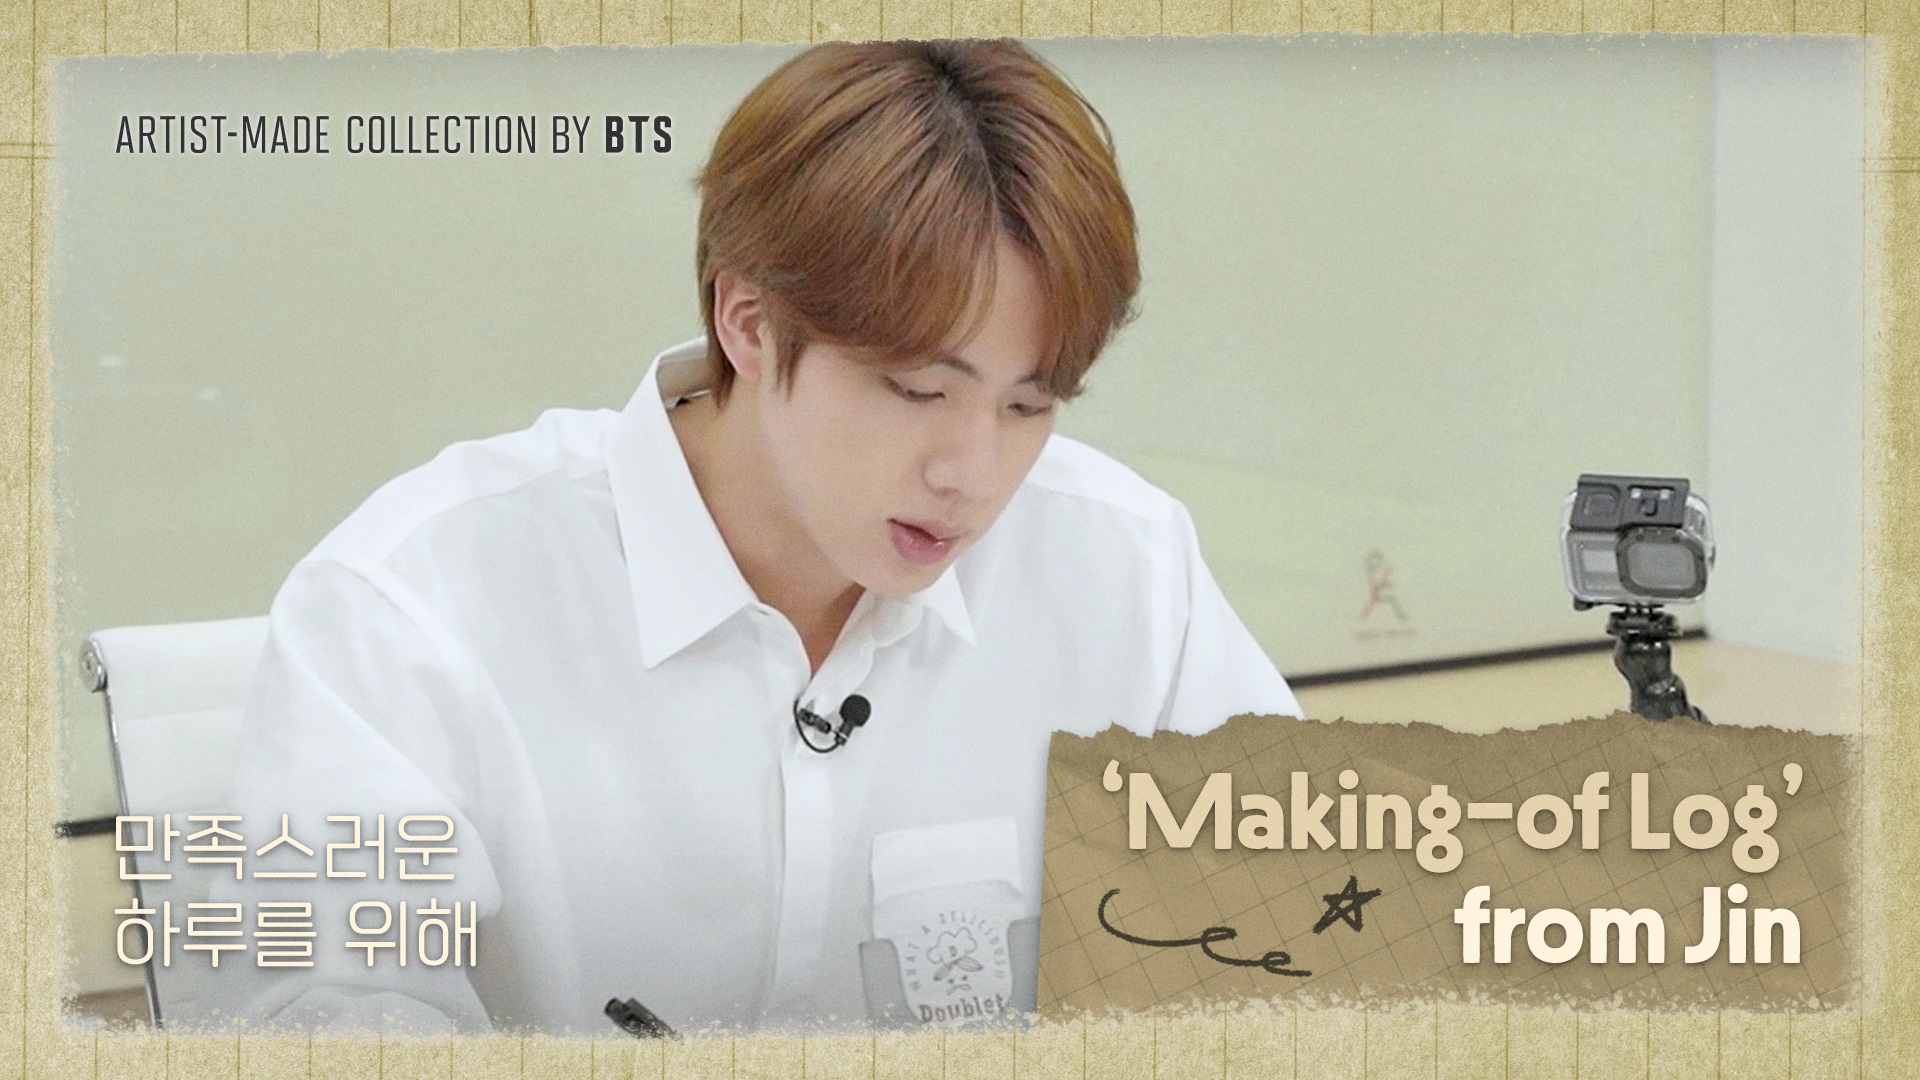 ARTIST-MADE COLLECTION BY BTS 'Making-of Log' from Jin